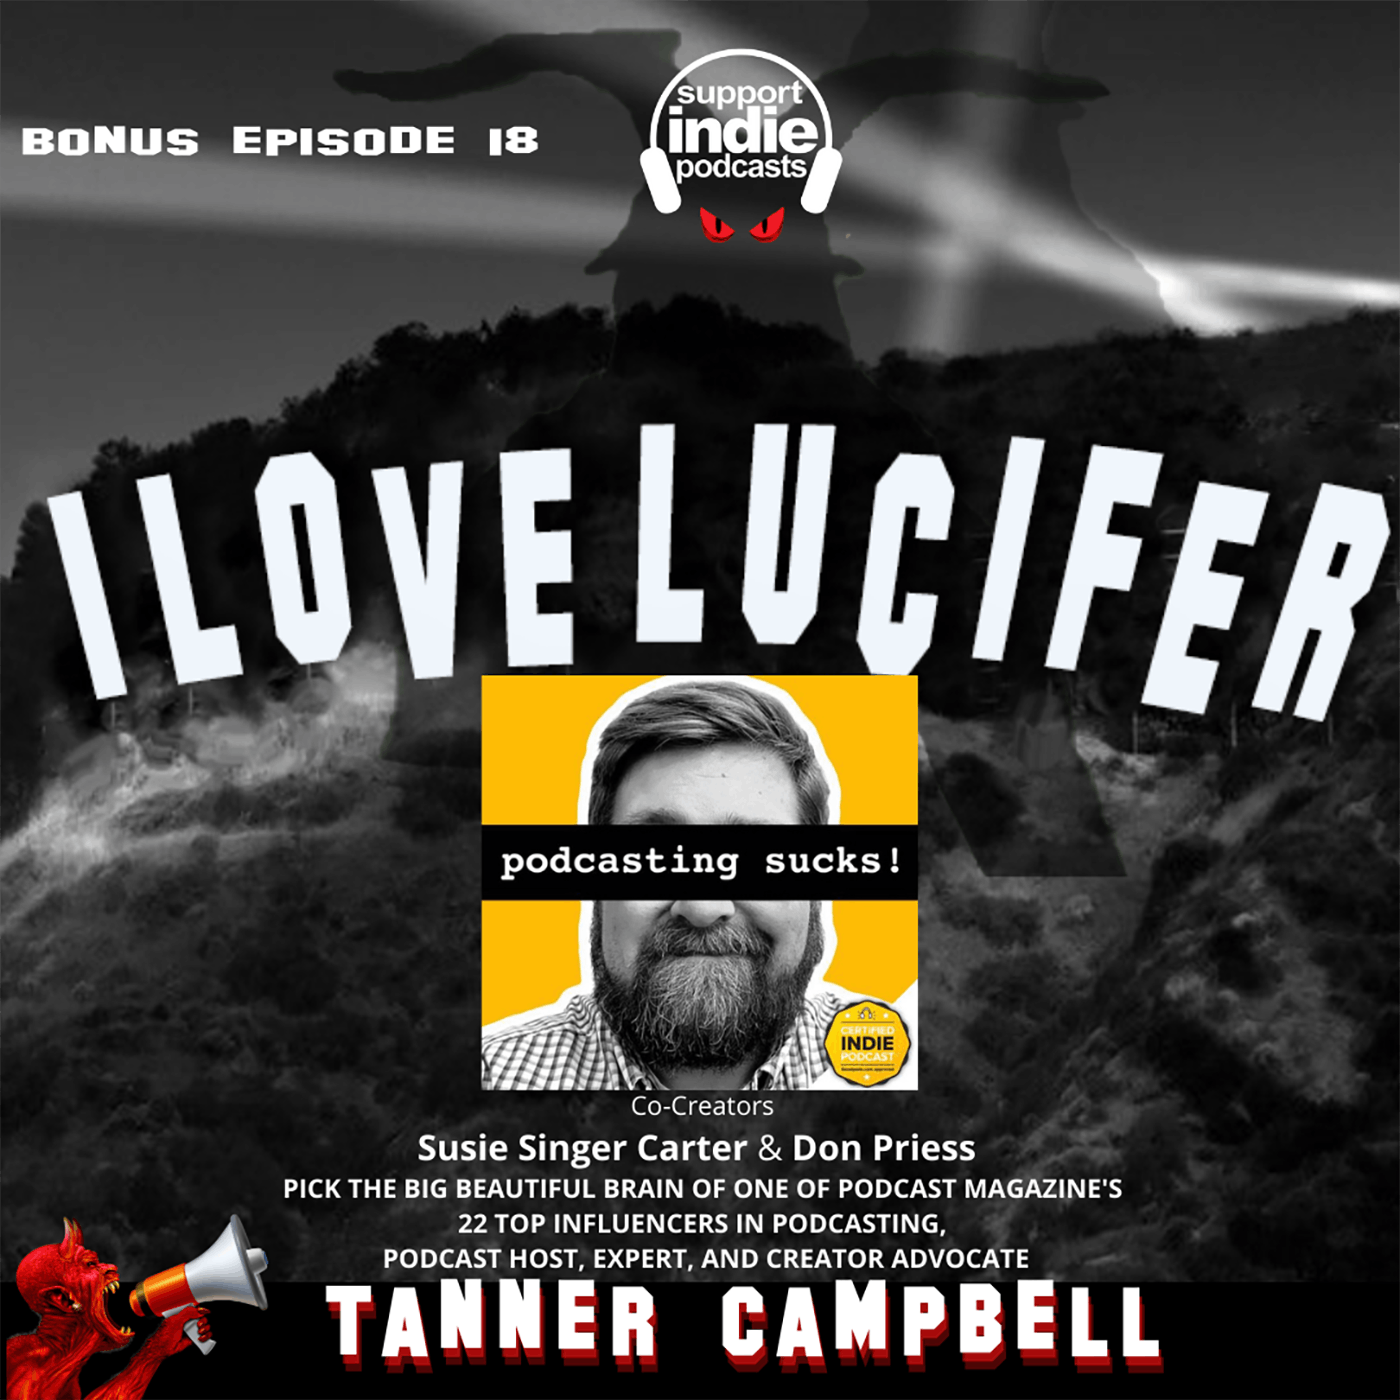 BONUS - Up Close with Podcast Expert Tanner Campbell